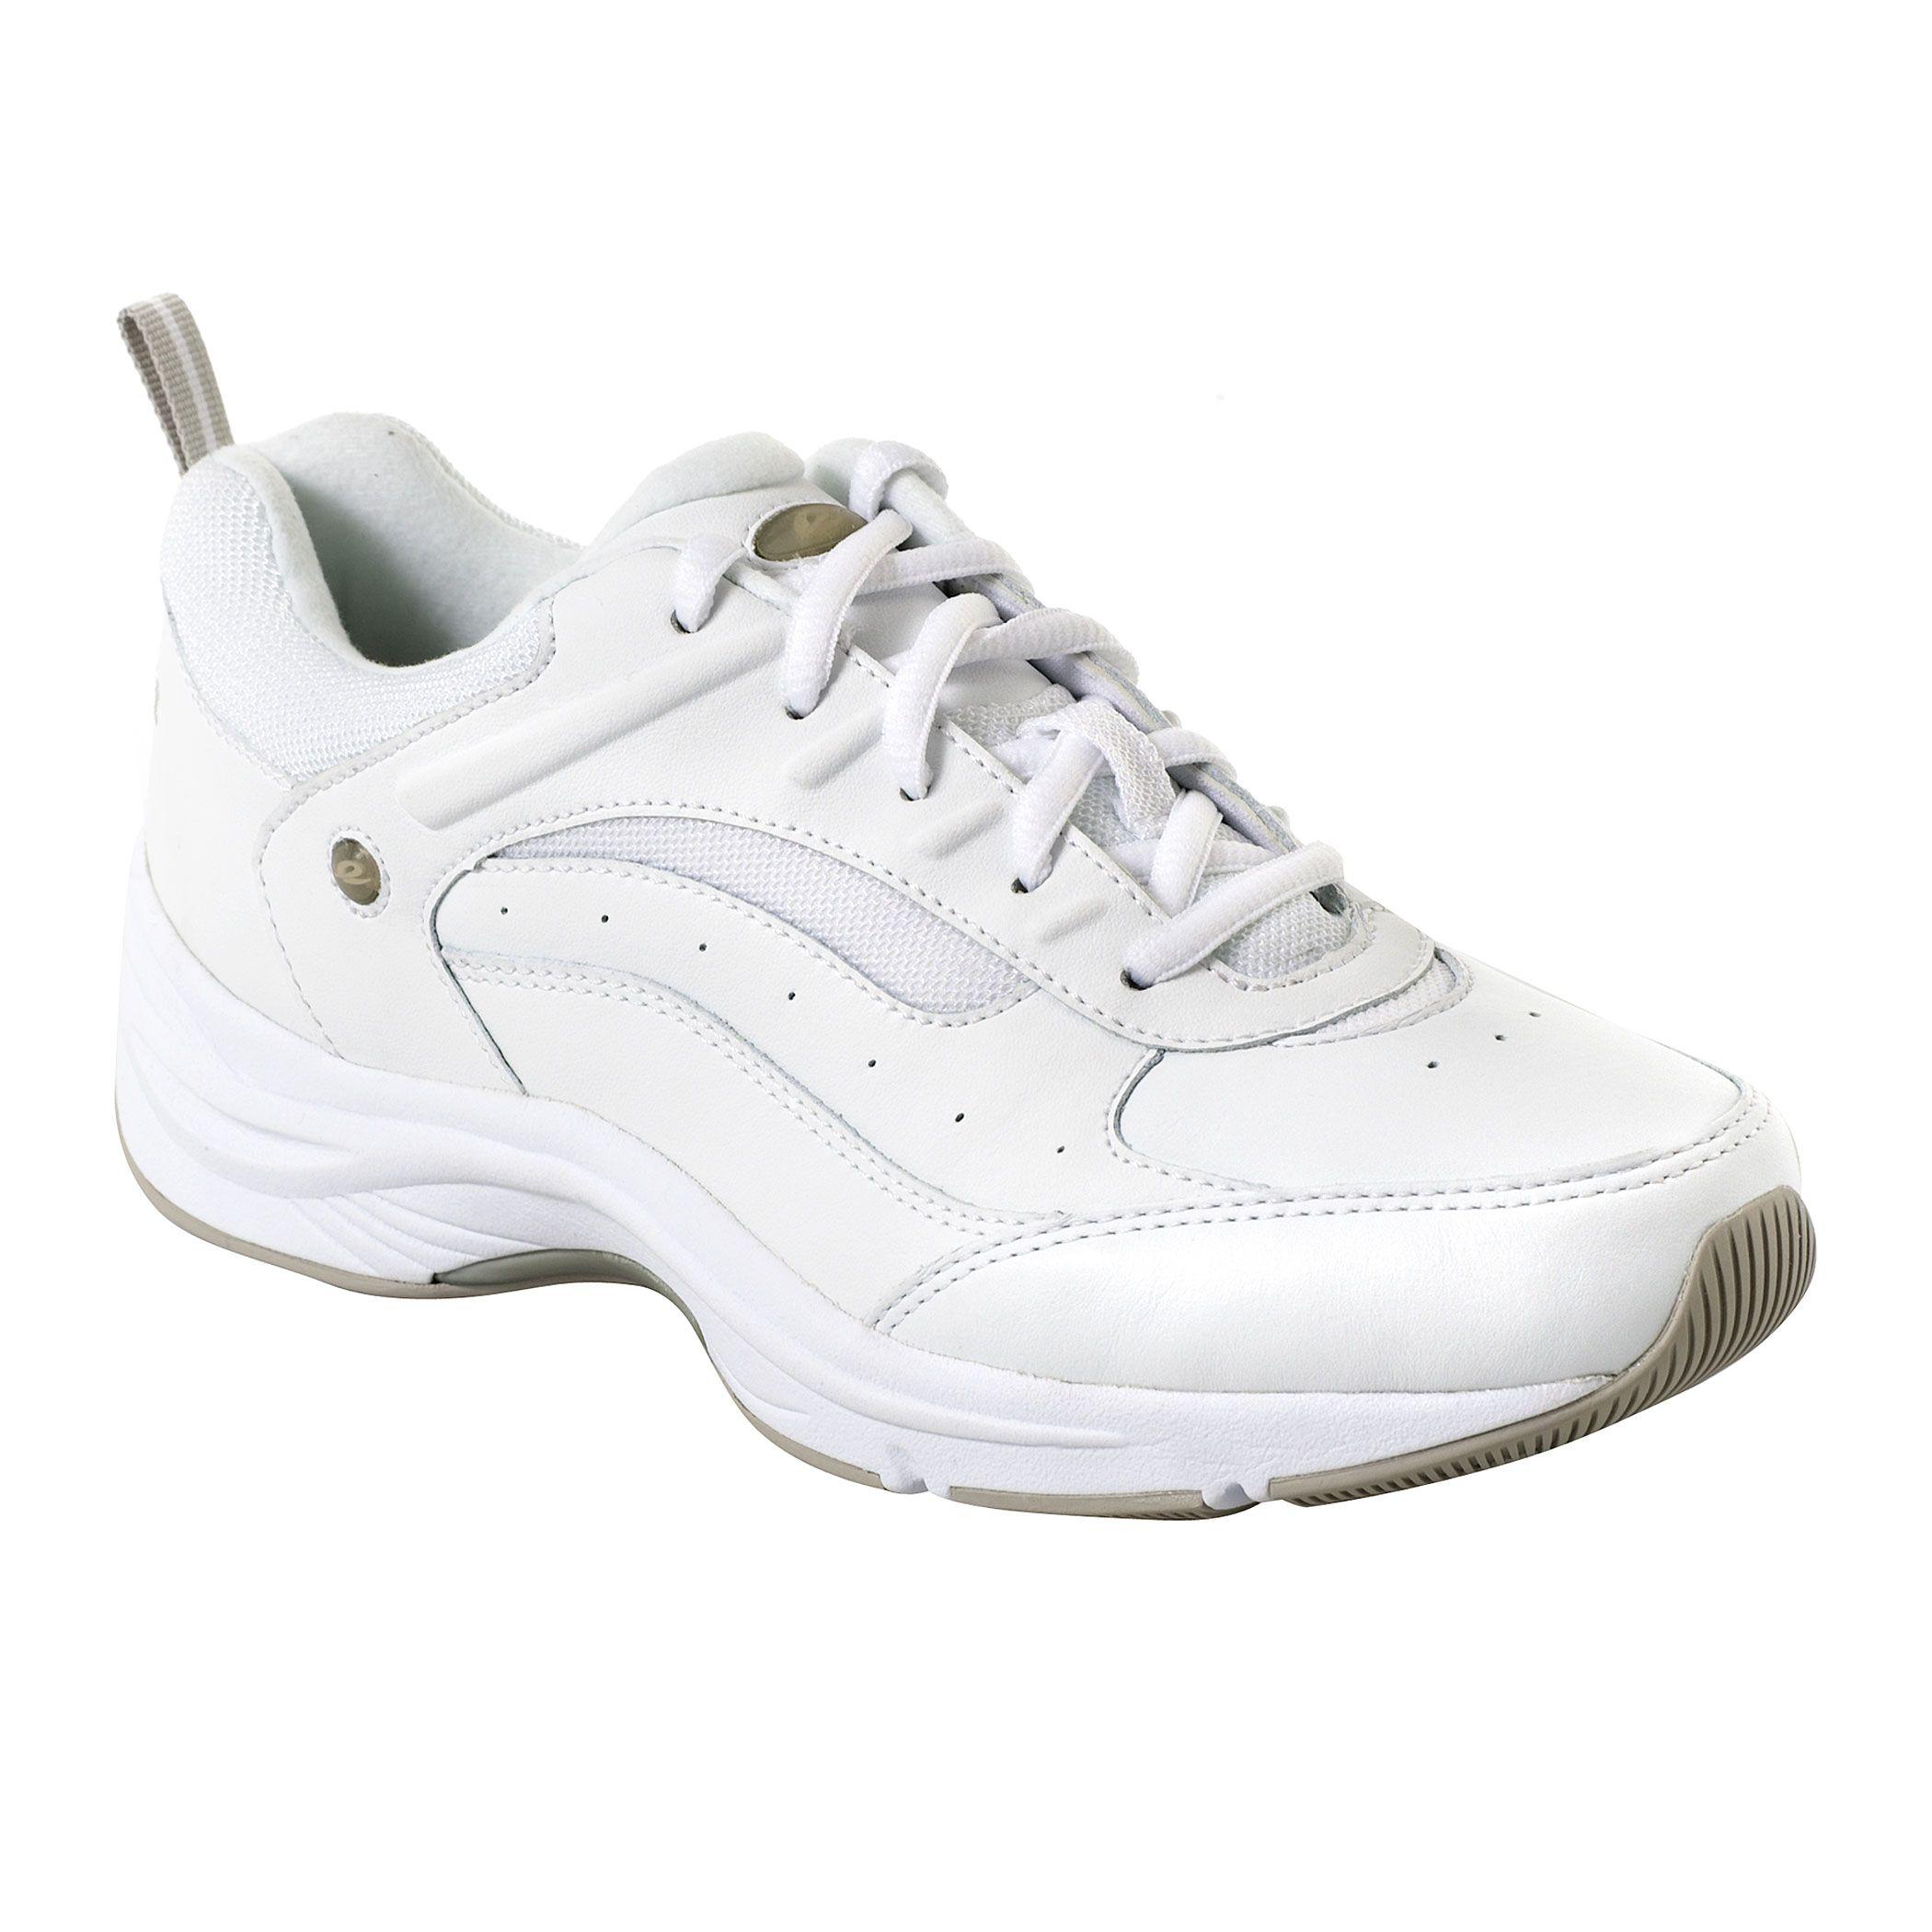 Easy Spirit Leather Grasp Walking Shoes in White Leather (White) - Lyst